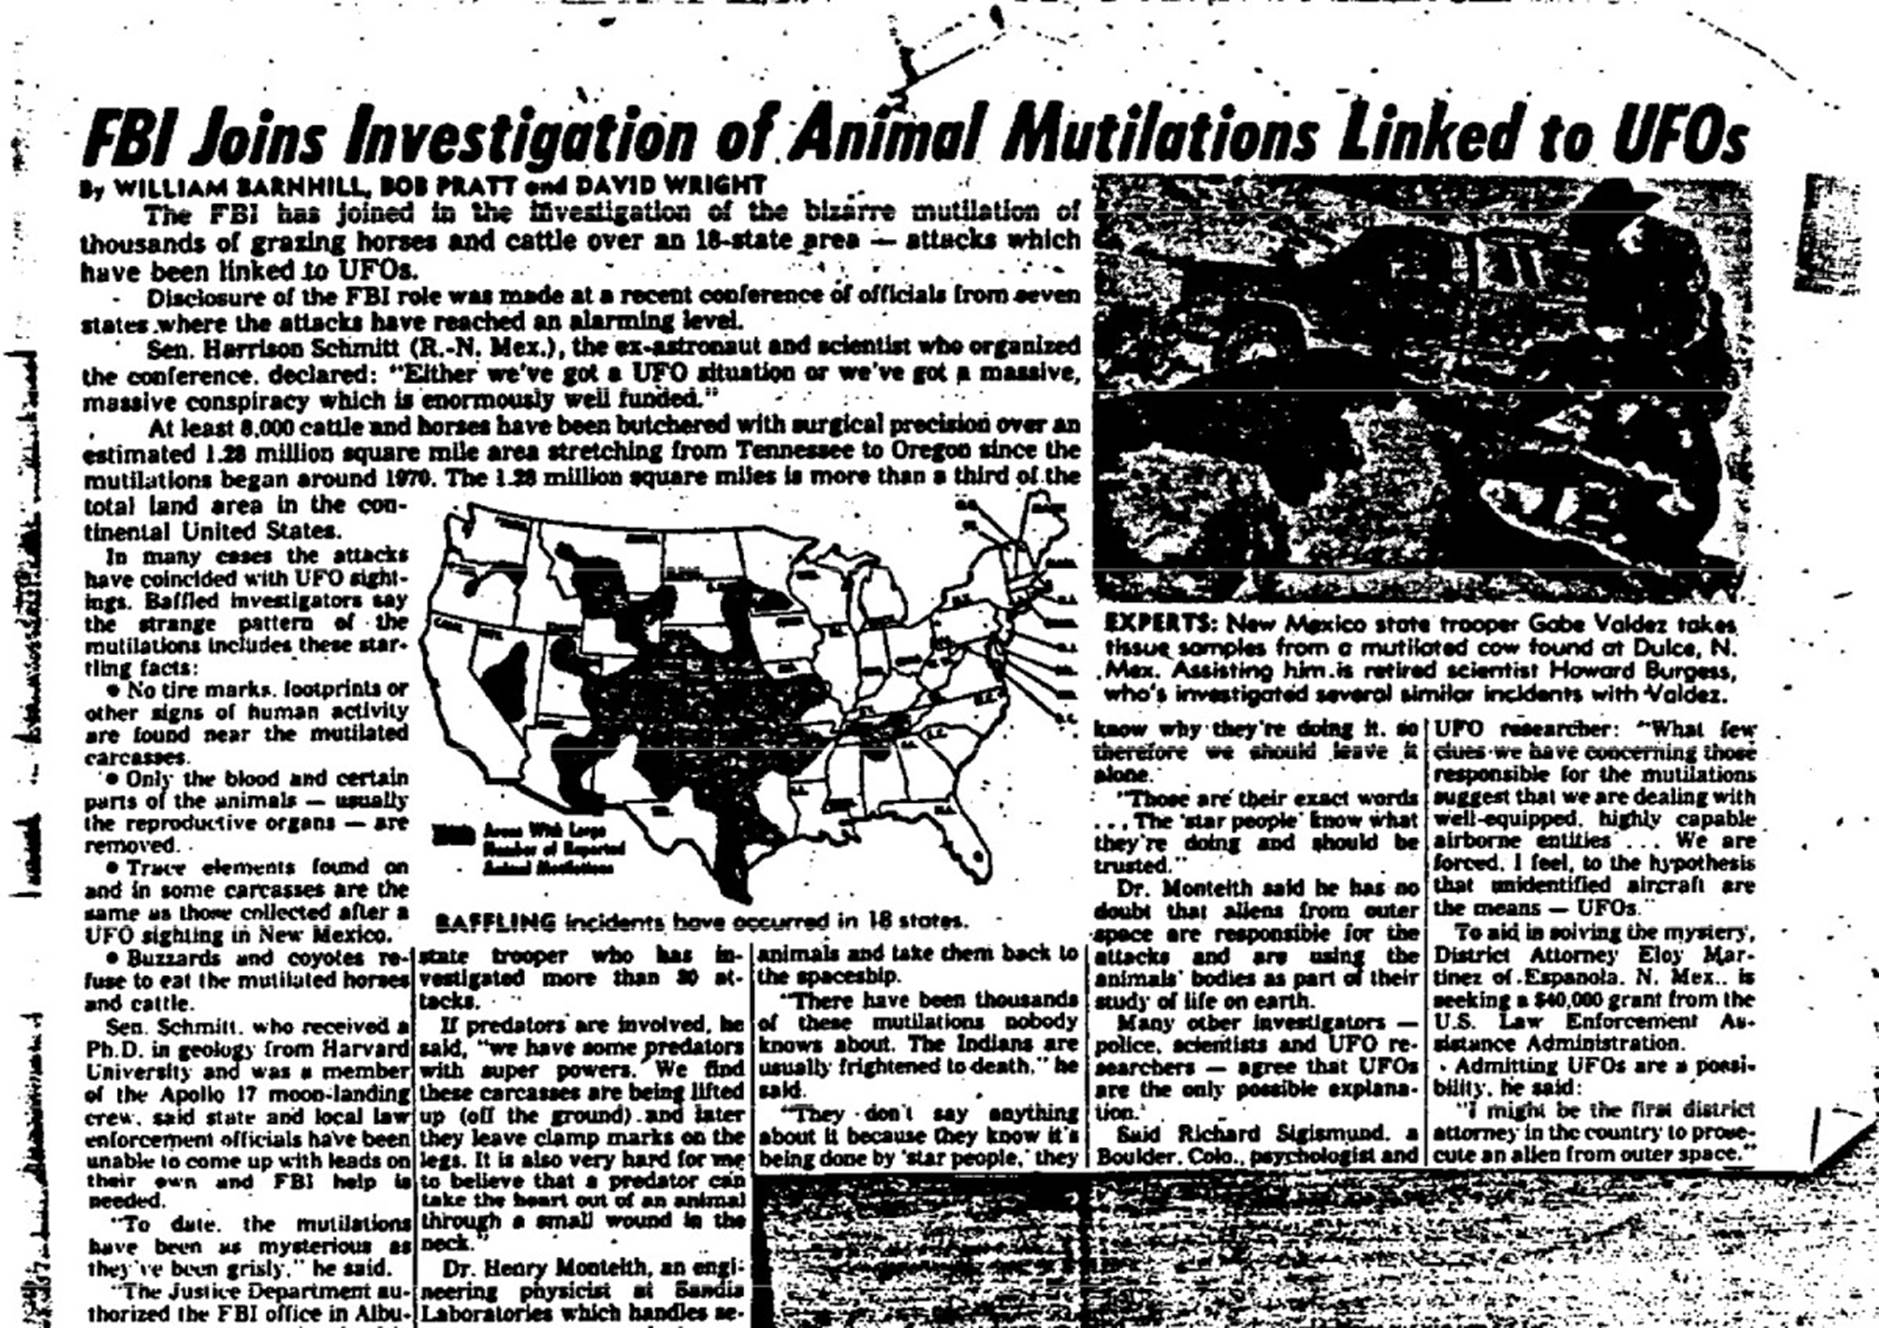 A newspaper clipping found in the now declassified FBI documents from their investigation into animal mutilations in the 1970s.